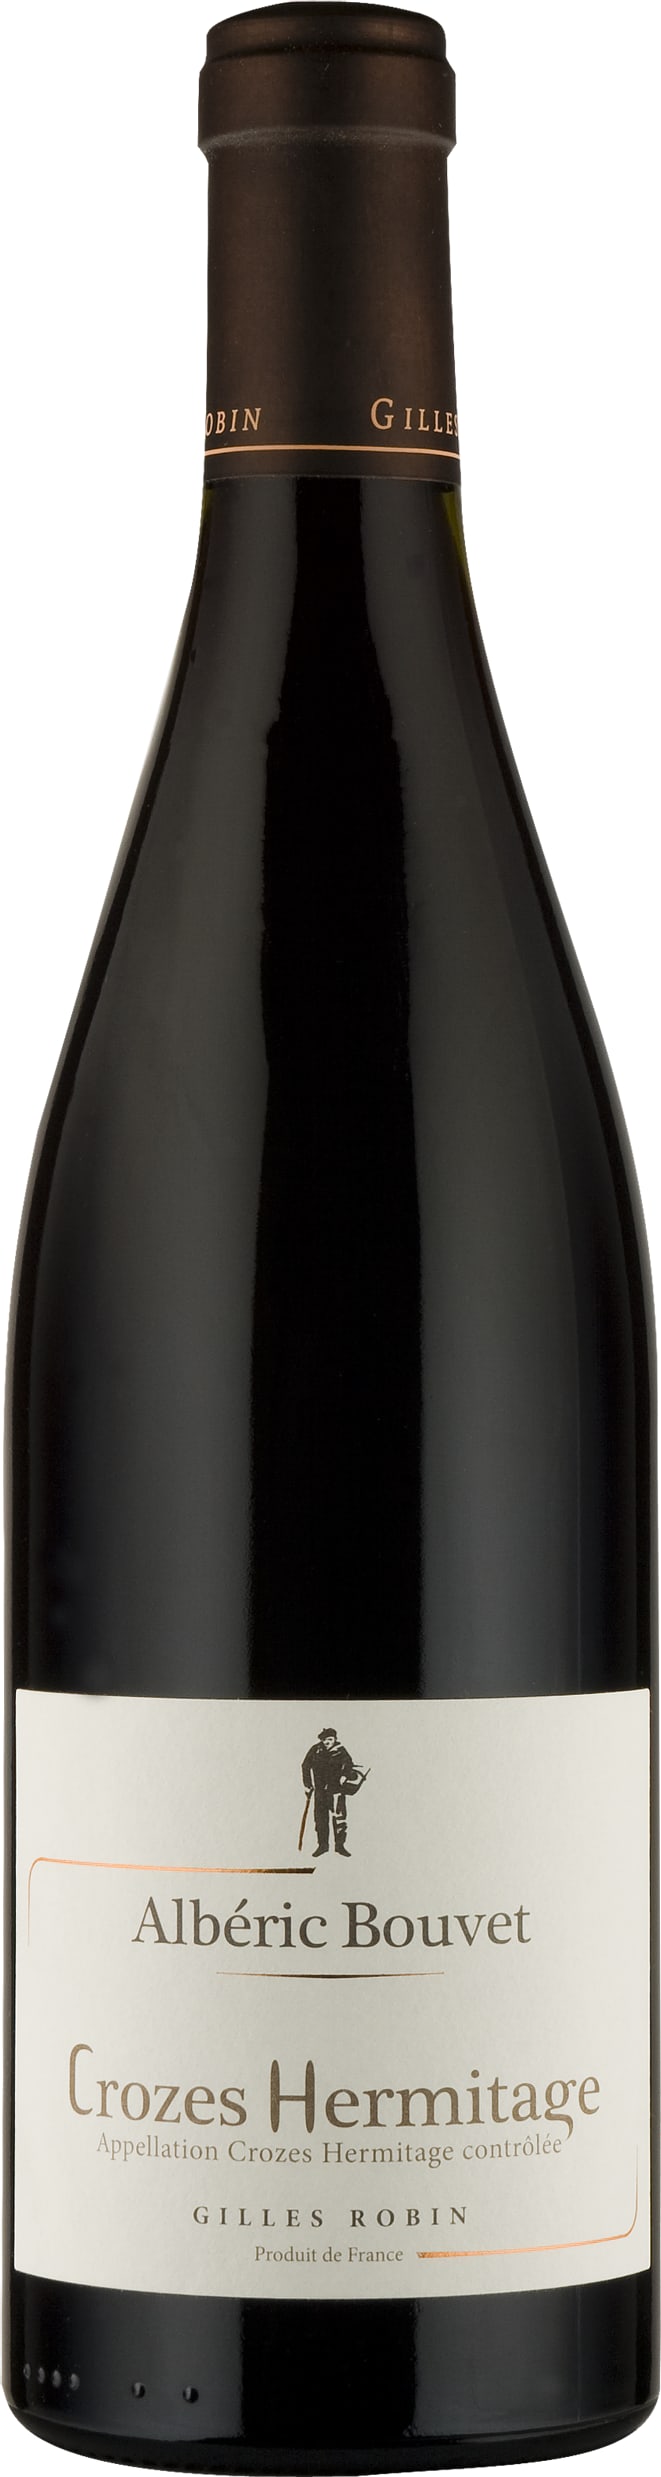 Gilles Robin Crozes-Hermitage 'Alberic' Organic 2021 75cl - Buy Gilles Robin Wines from GREAT WINES DIRECT wine shop